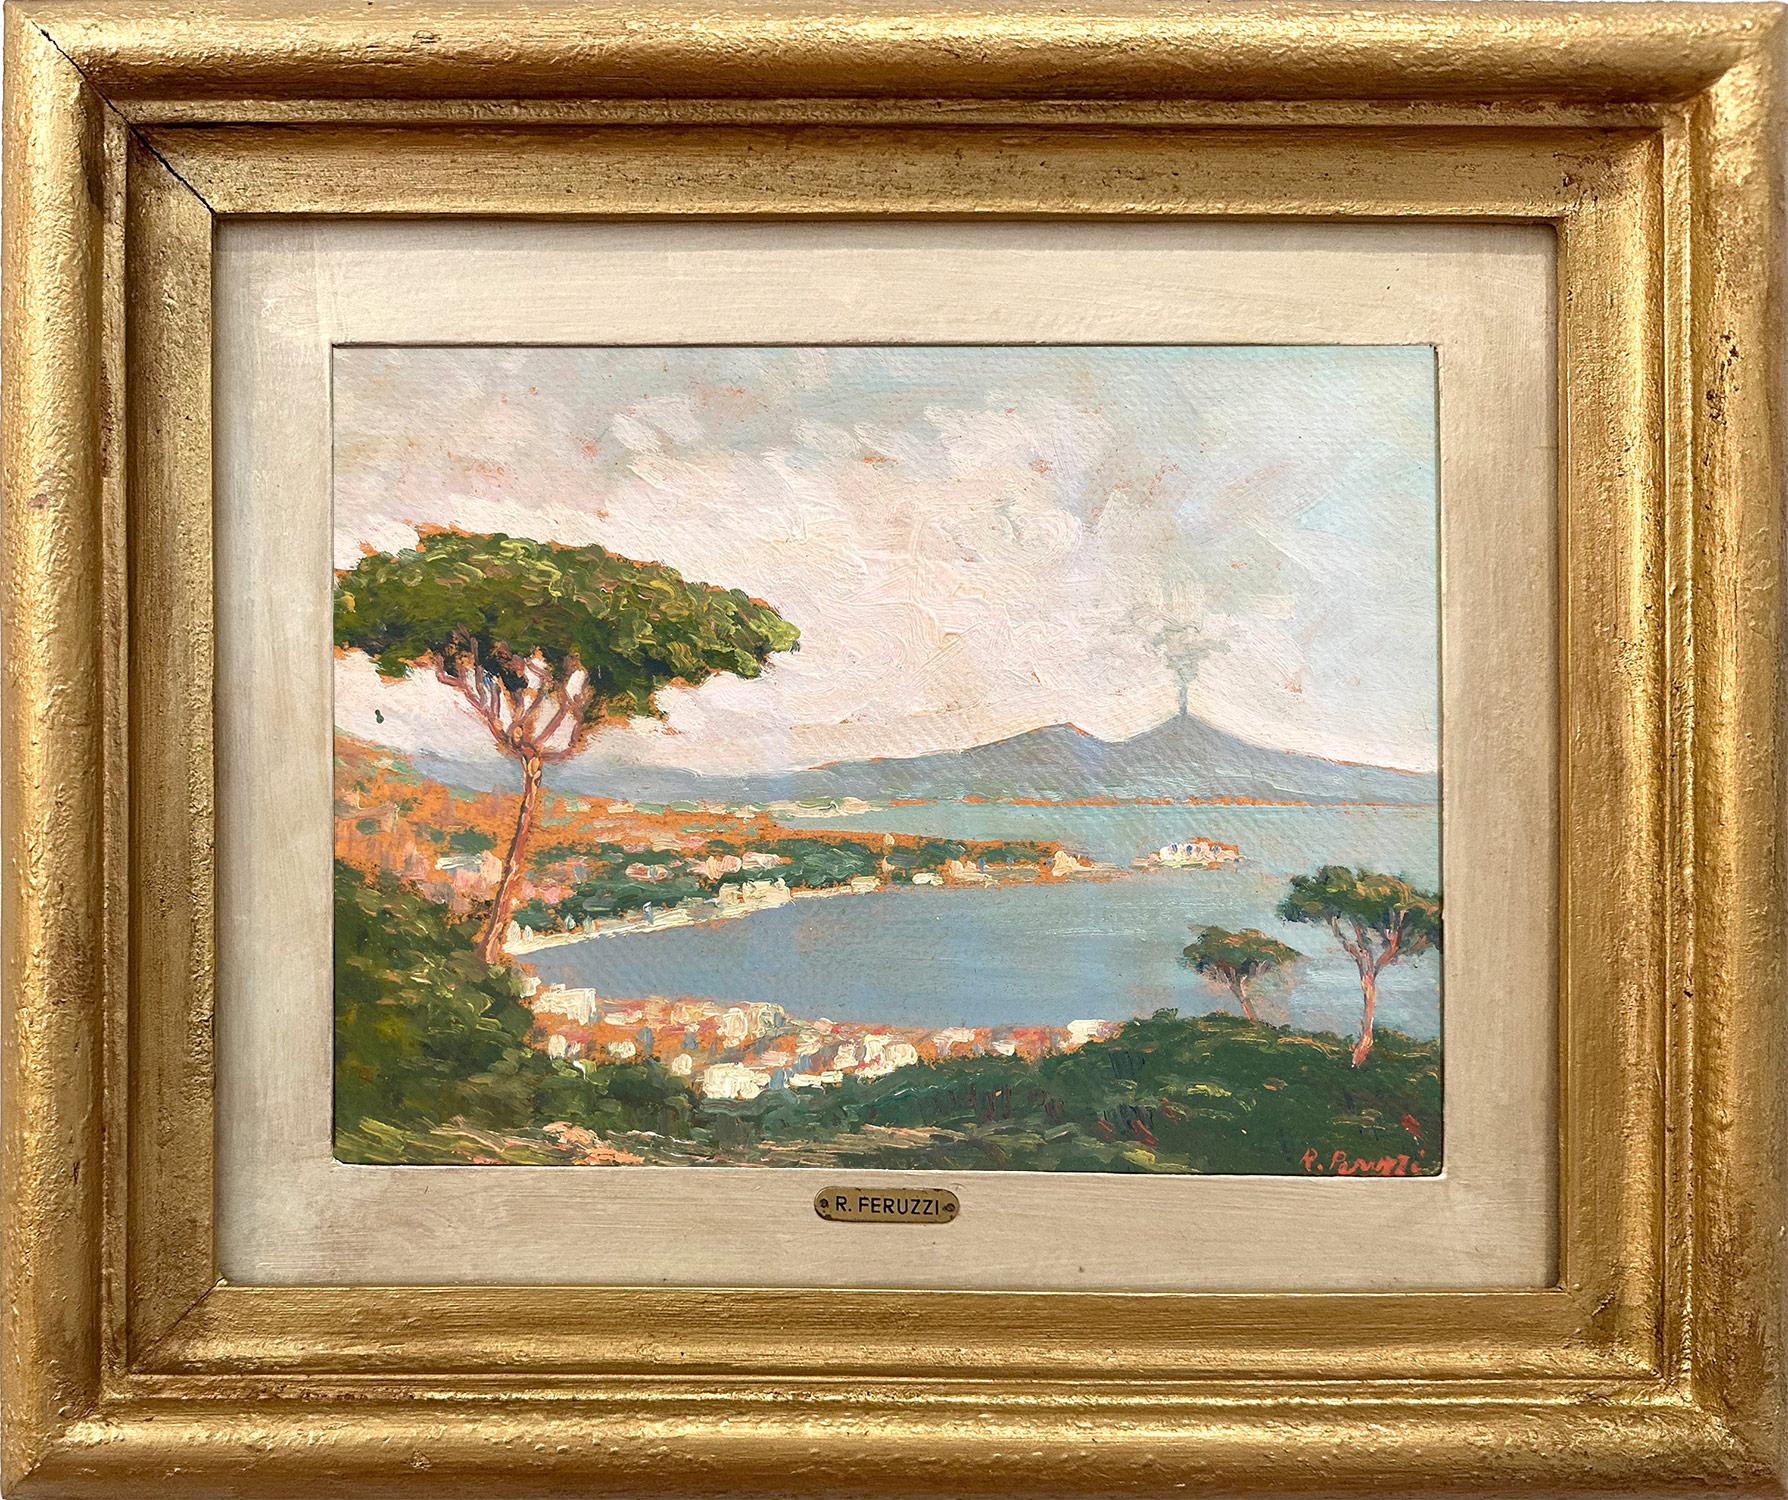 Roberto Feruzzi Landscape Painting - "View of Capri" Italian Colorful Impressionist Oil Painting on Board Framed